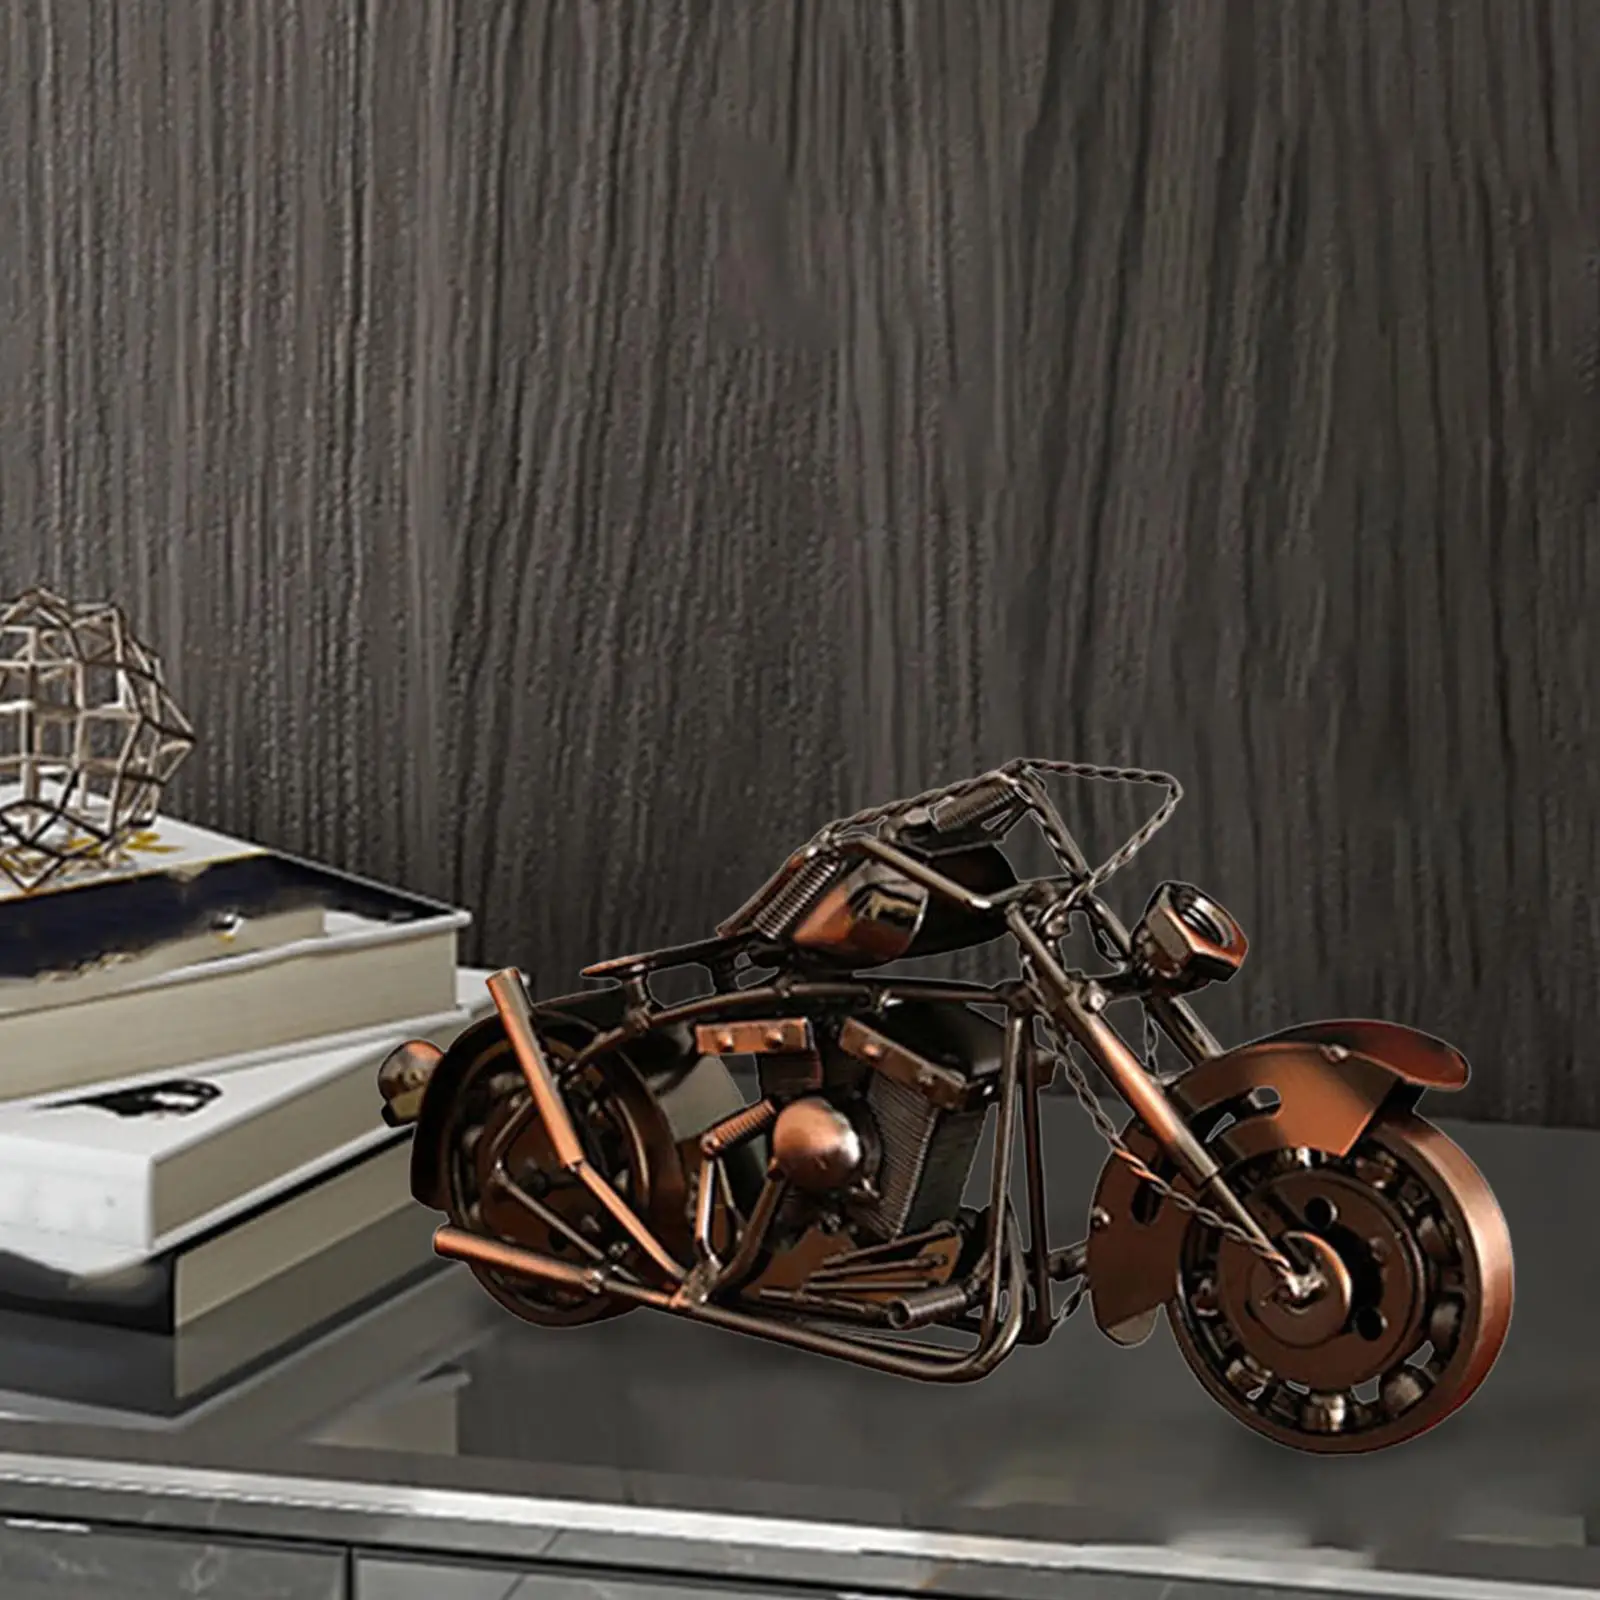 Motorcycle Model Motorbike Iron Art Sculpture Decoration for